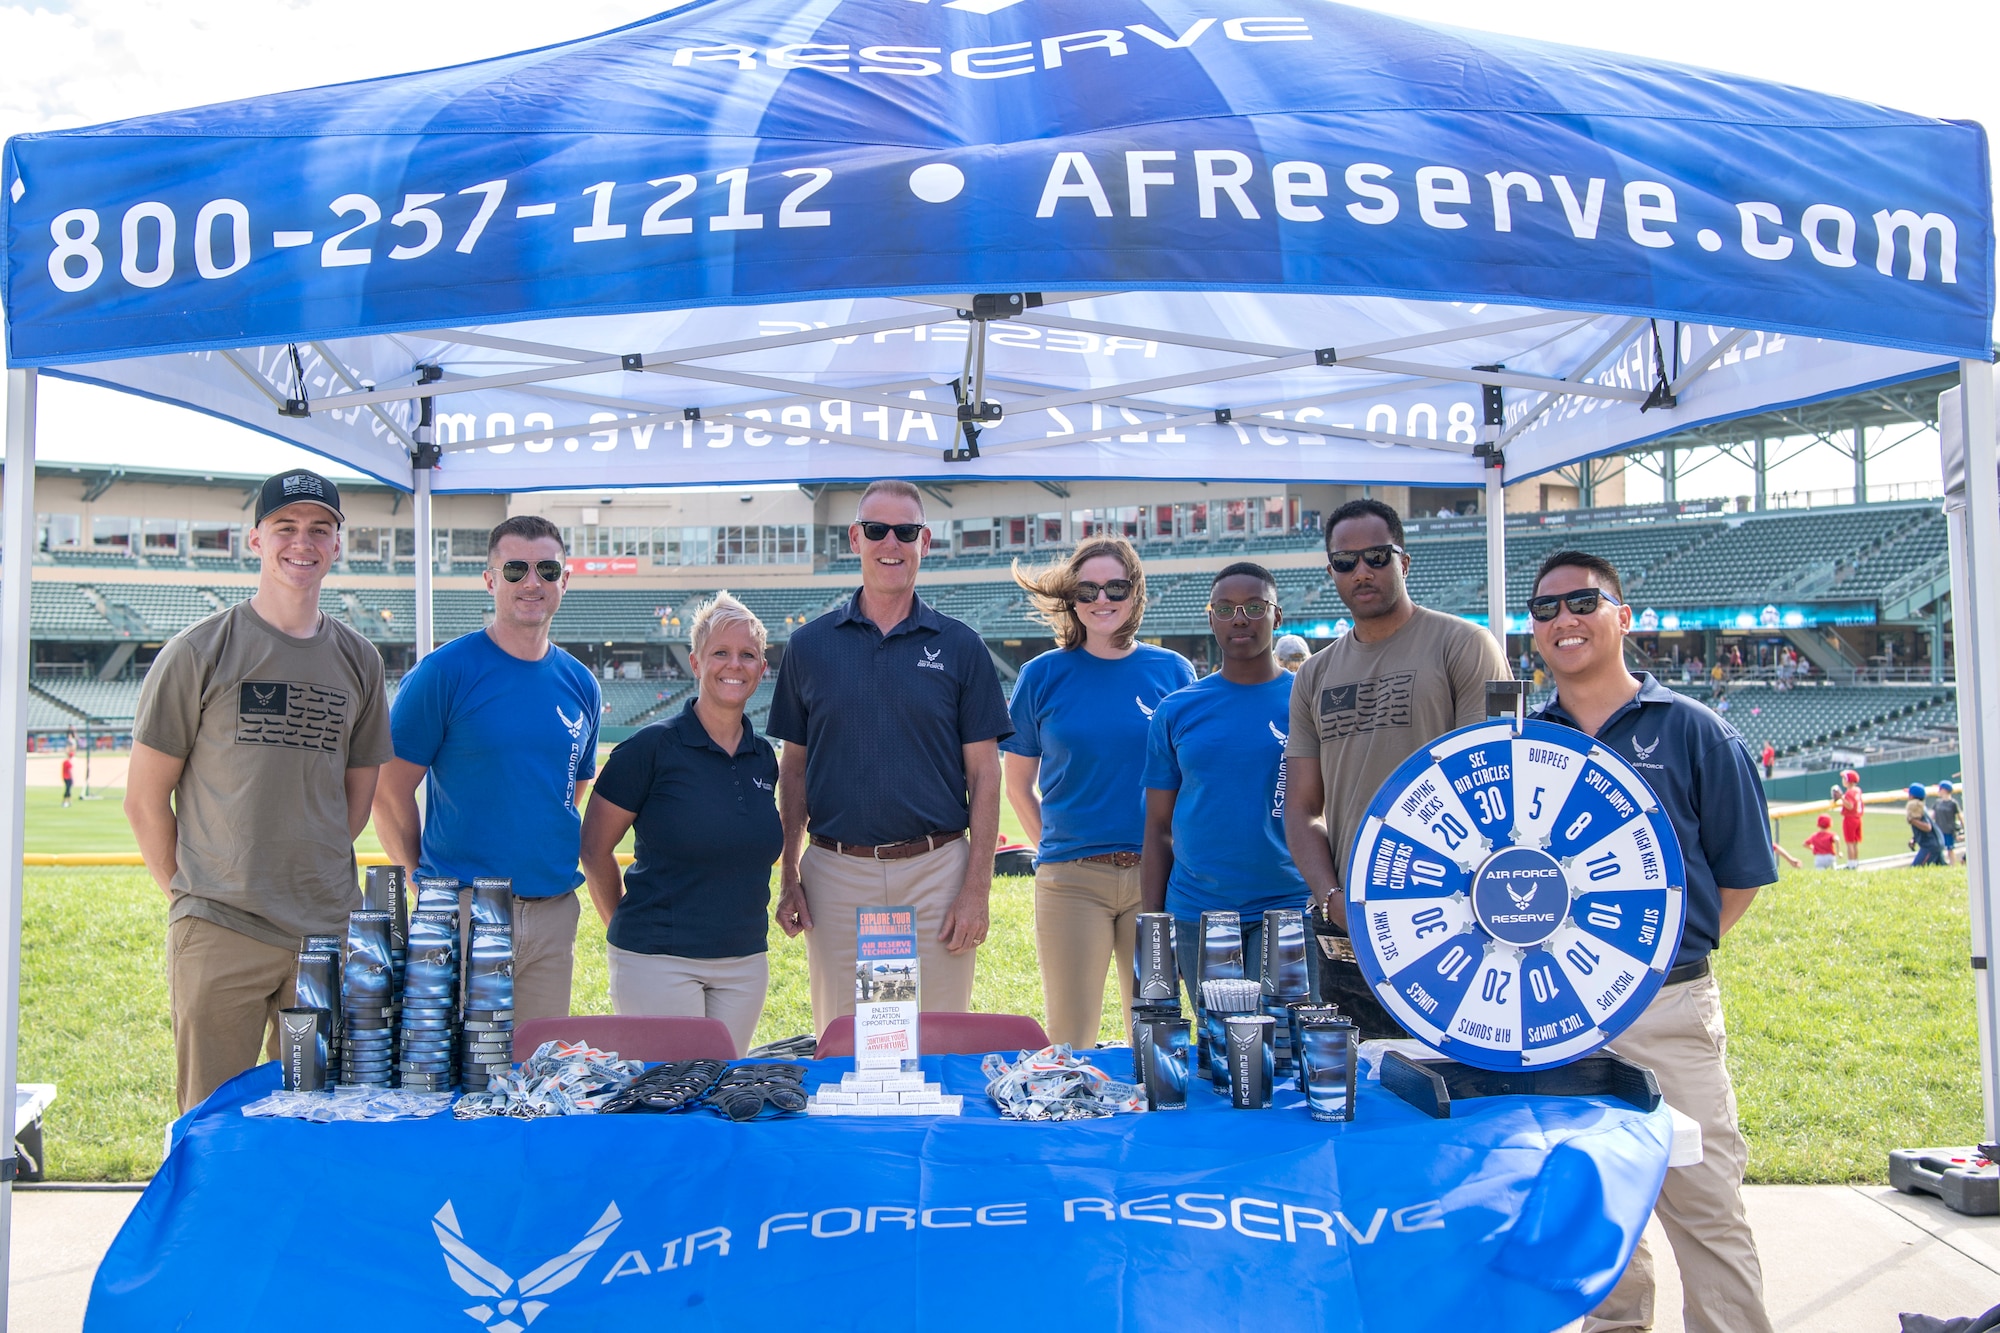 Col. Larry Shaw, 434th Air Refueling Wing commander, center, along with Airmen and recruiters from the 434th Air Refueling Wing pose for a group photo during an Indians baseball game in Indianapolis, Indiana June 25, 2019. The wing is continually using innovative recruiting practices in an effort to keep positions filled at Grissom. (U.S. Air Force photo/Master Sgt. Ben Mota)